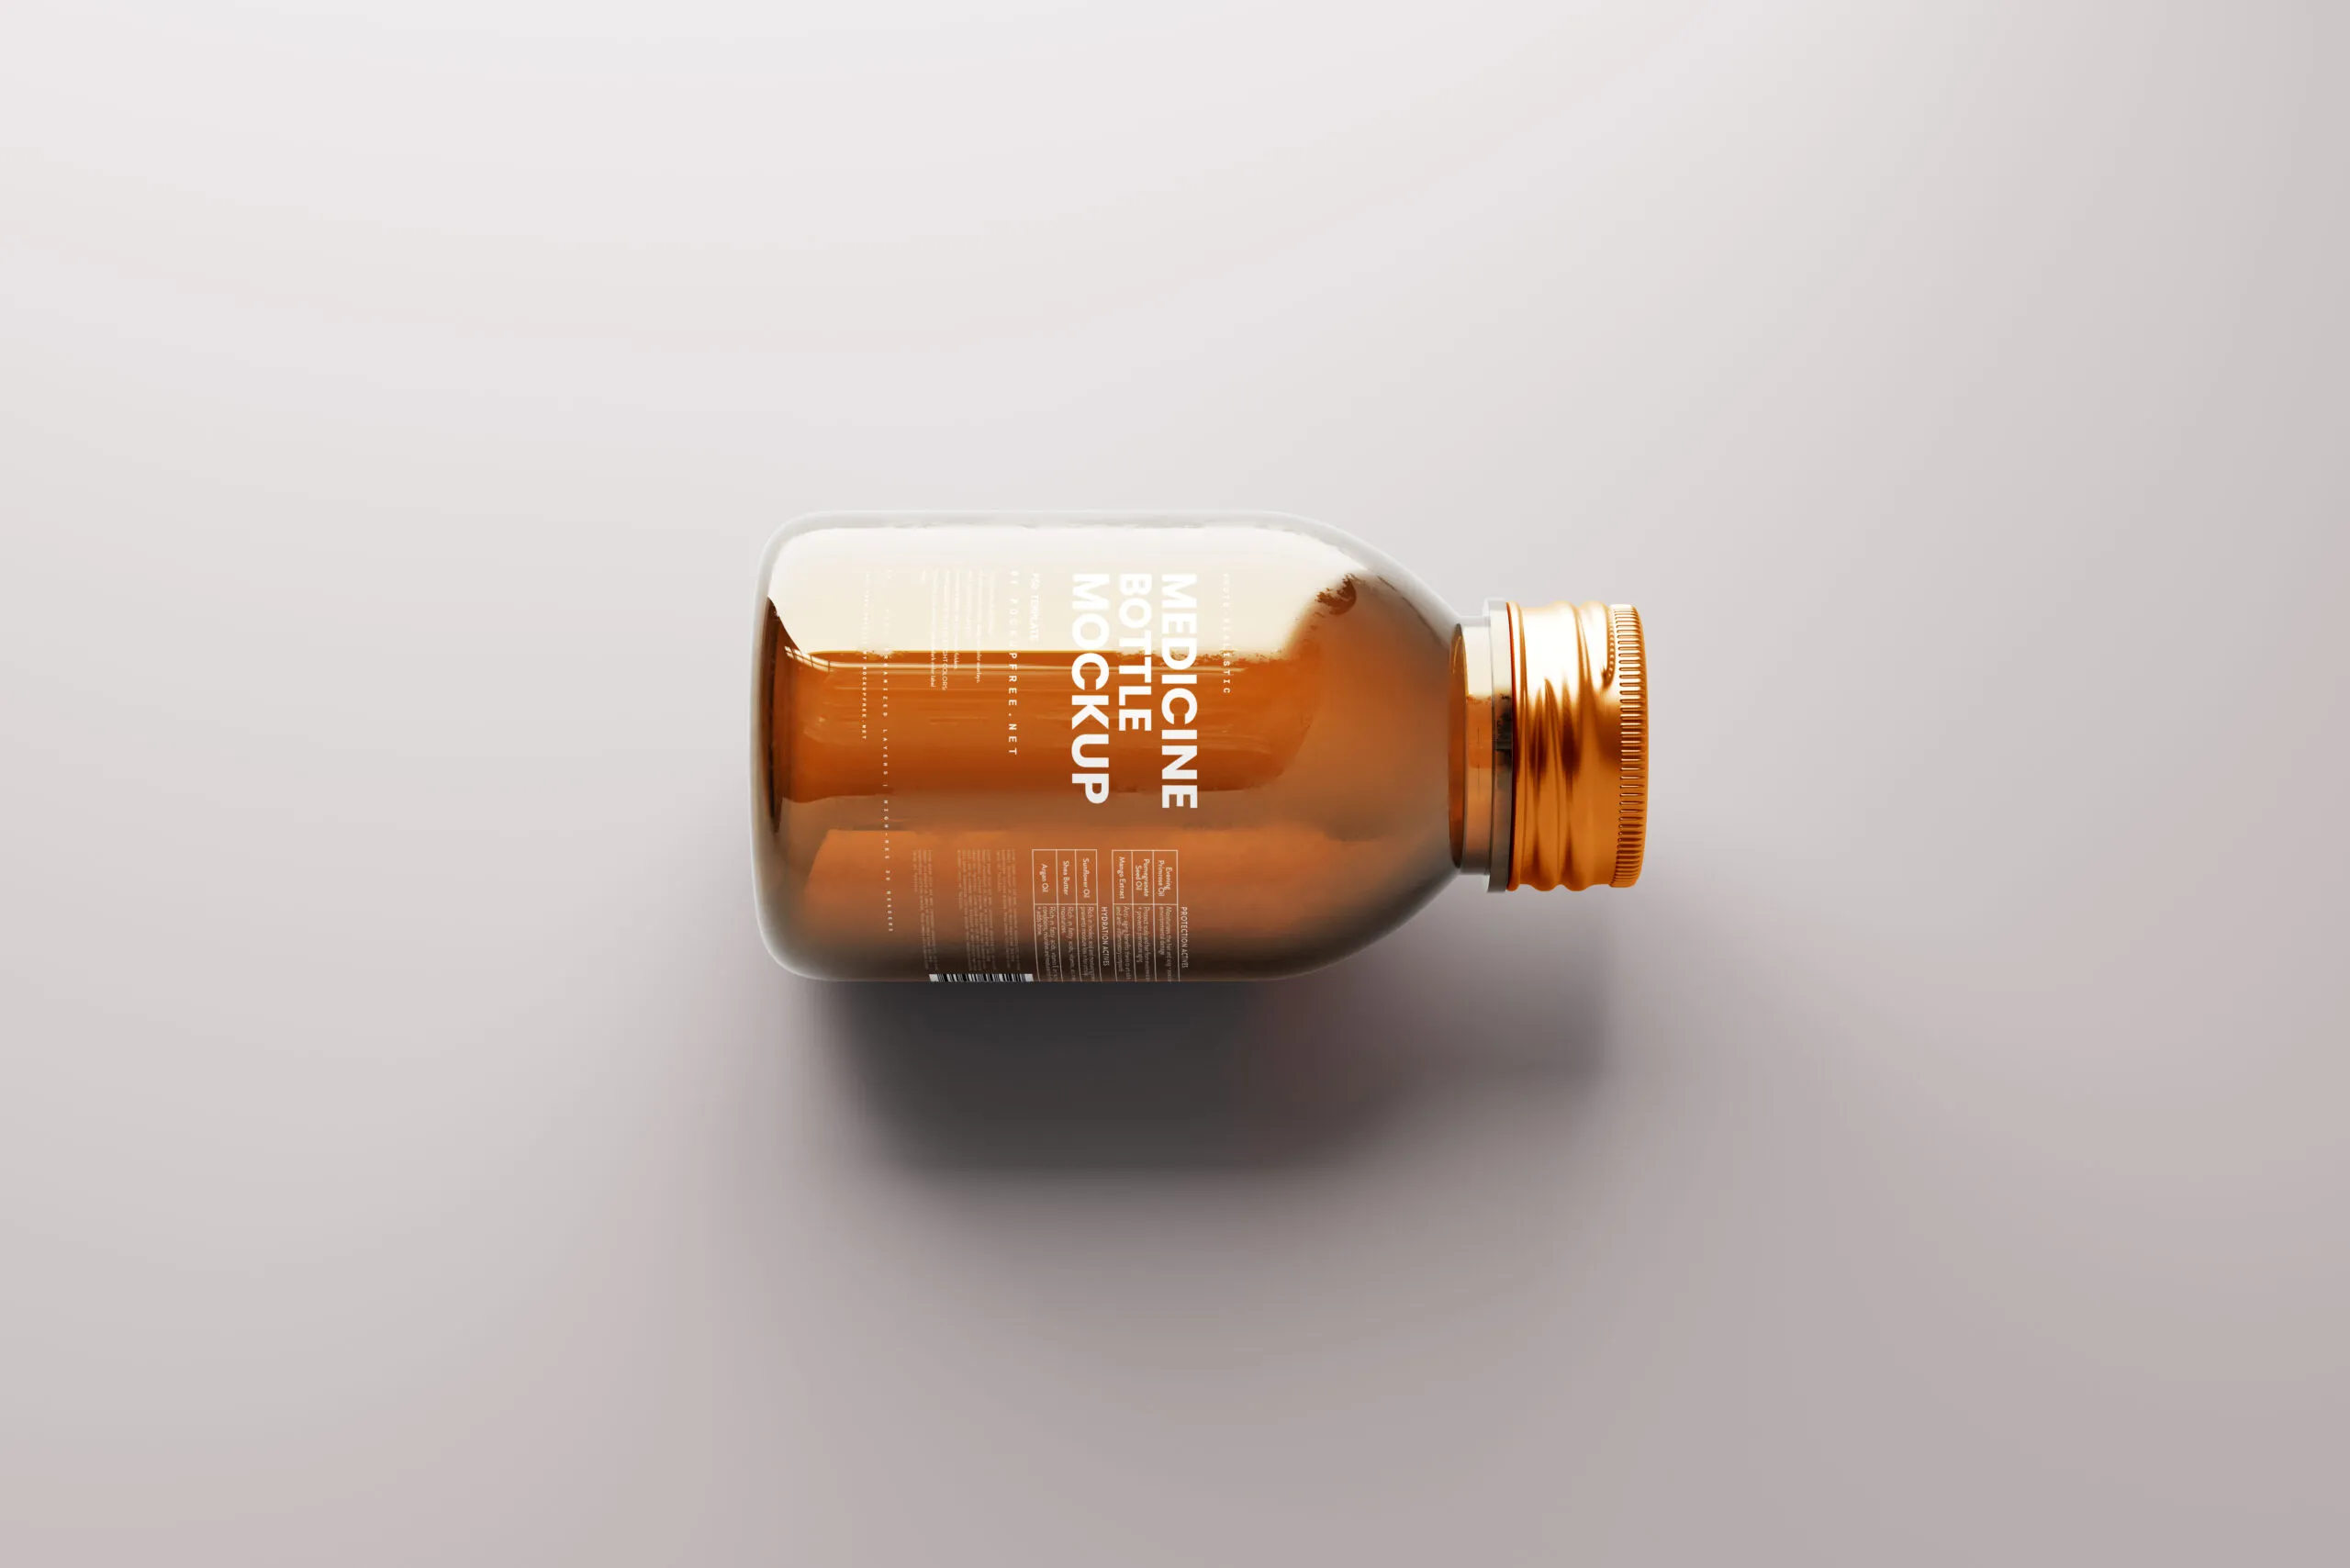 5 Small Liquid Medicine Bottle Mockups in Different Sights FREE PSD